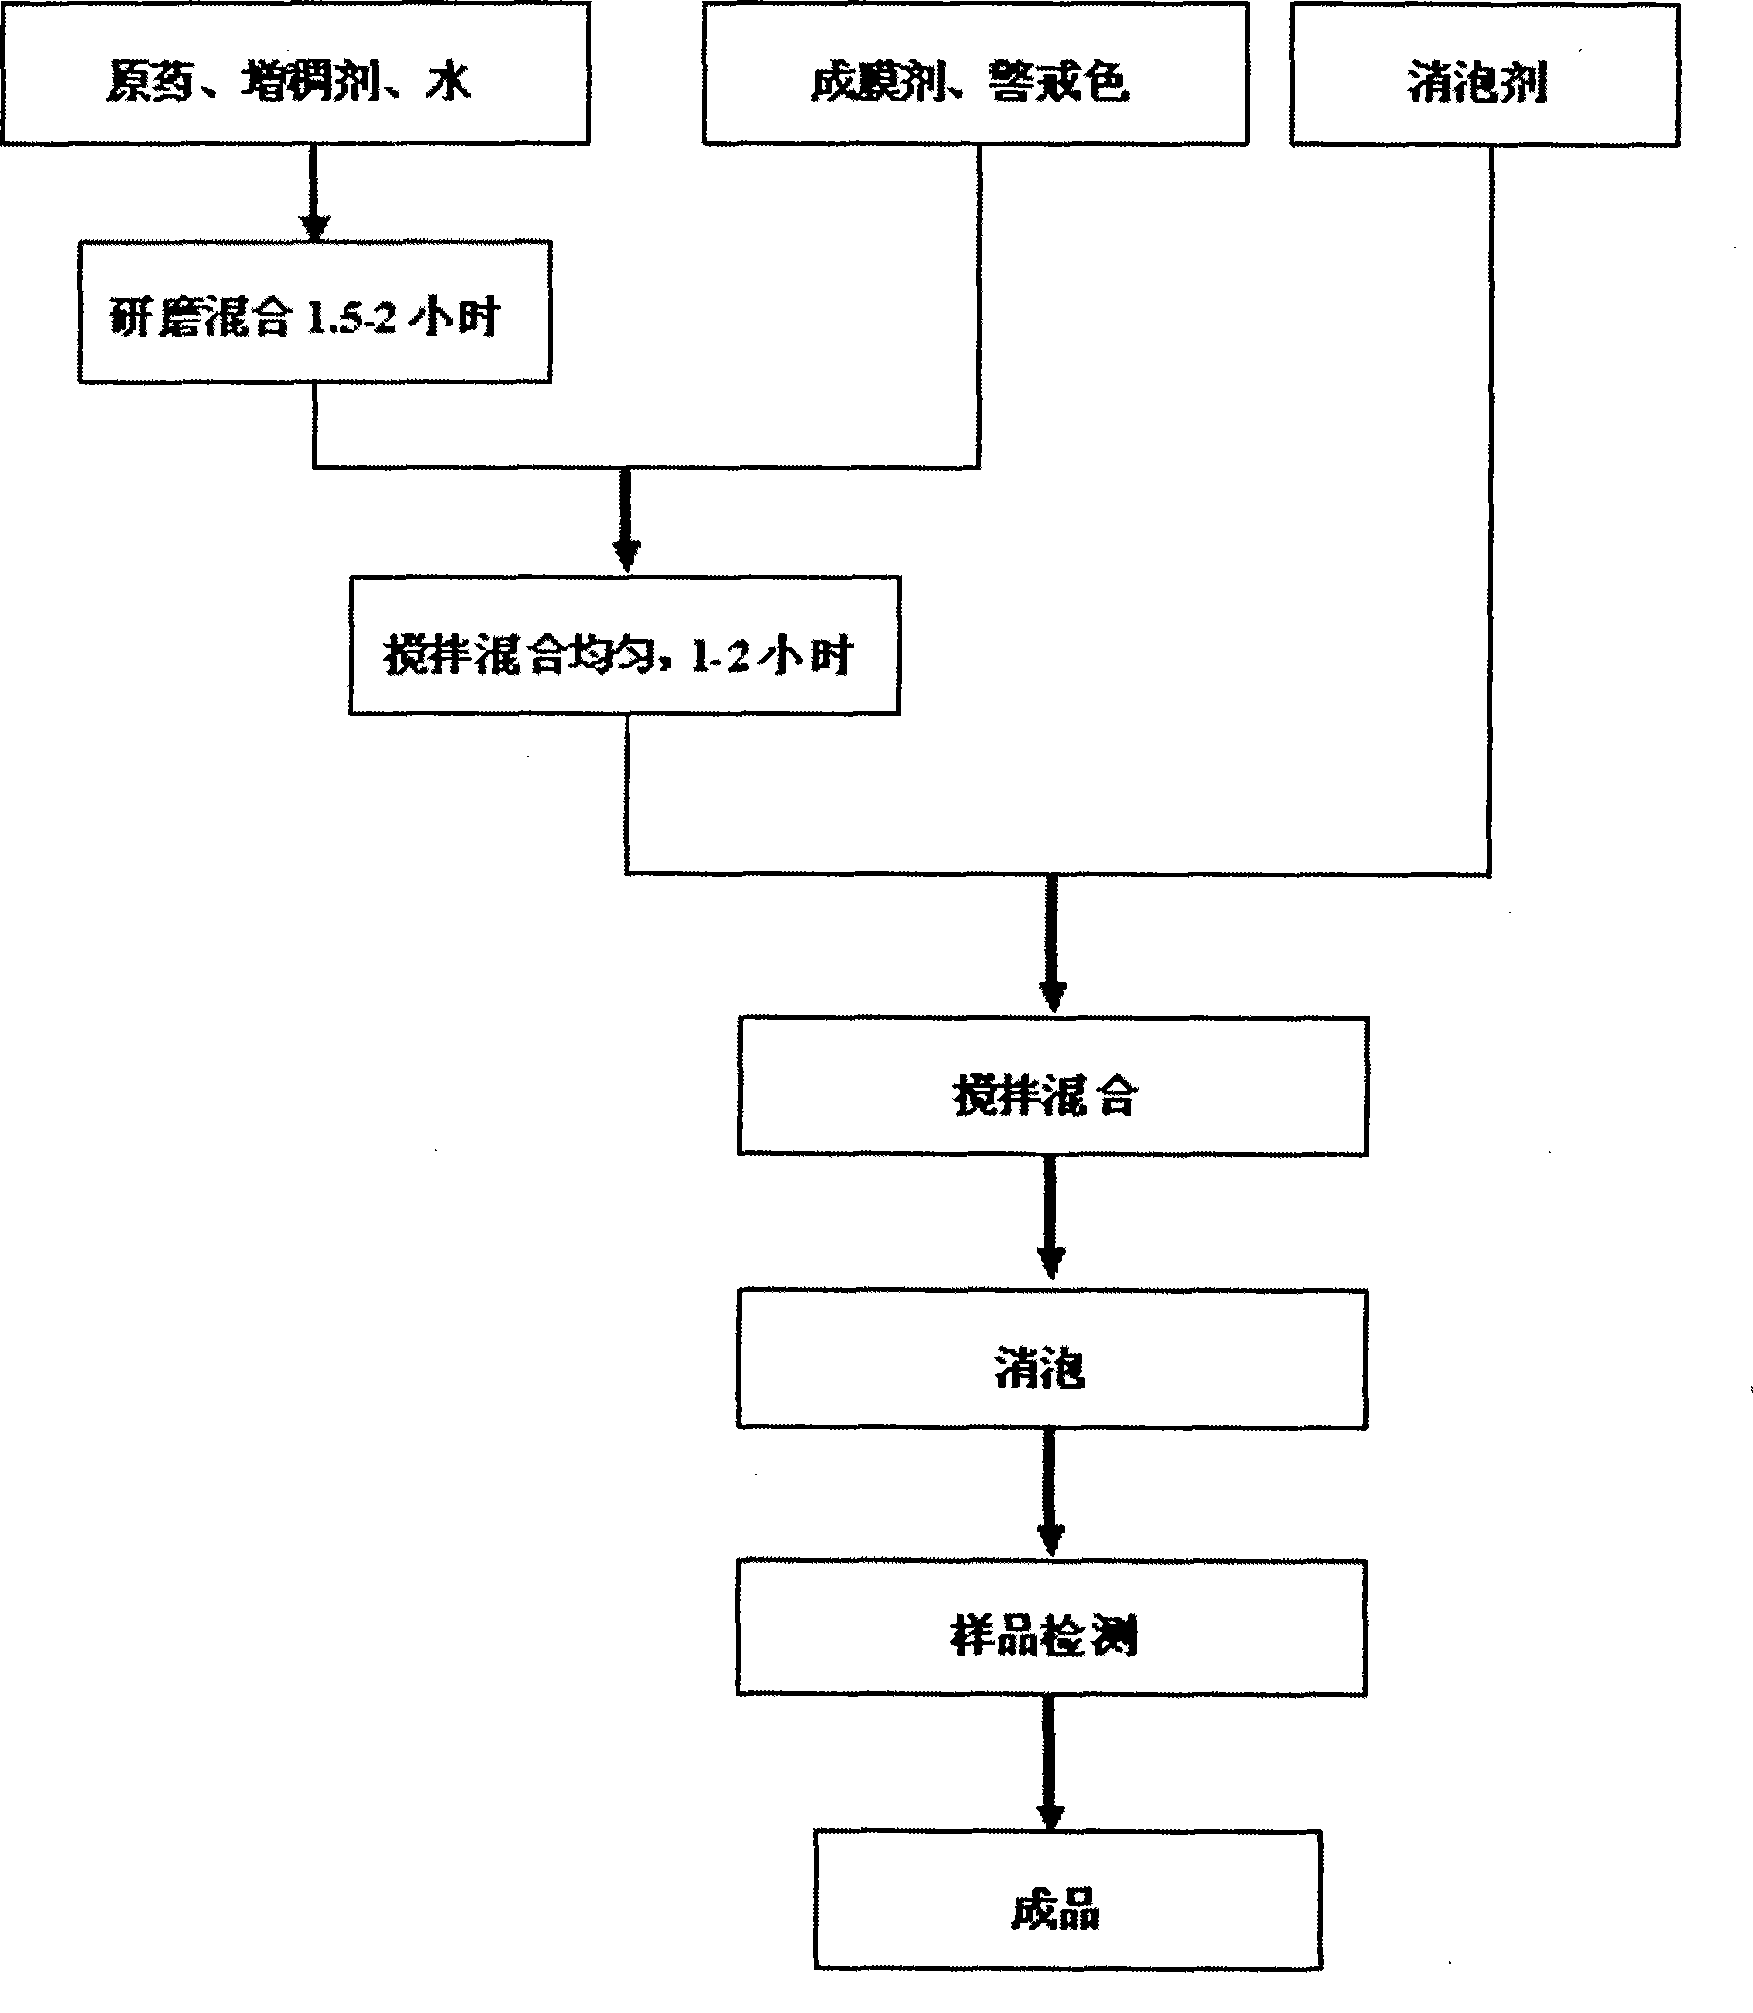 Seed coating agent for controlling soya foot rot and preparation method thereof